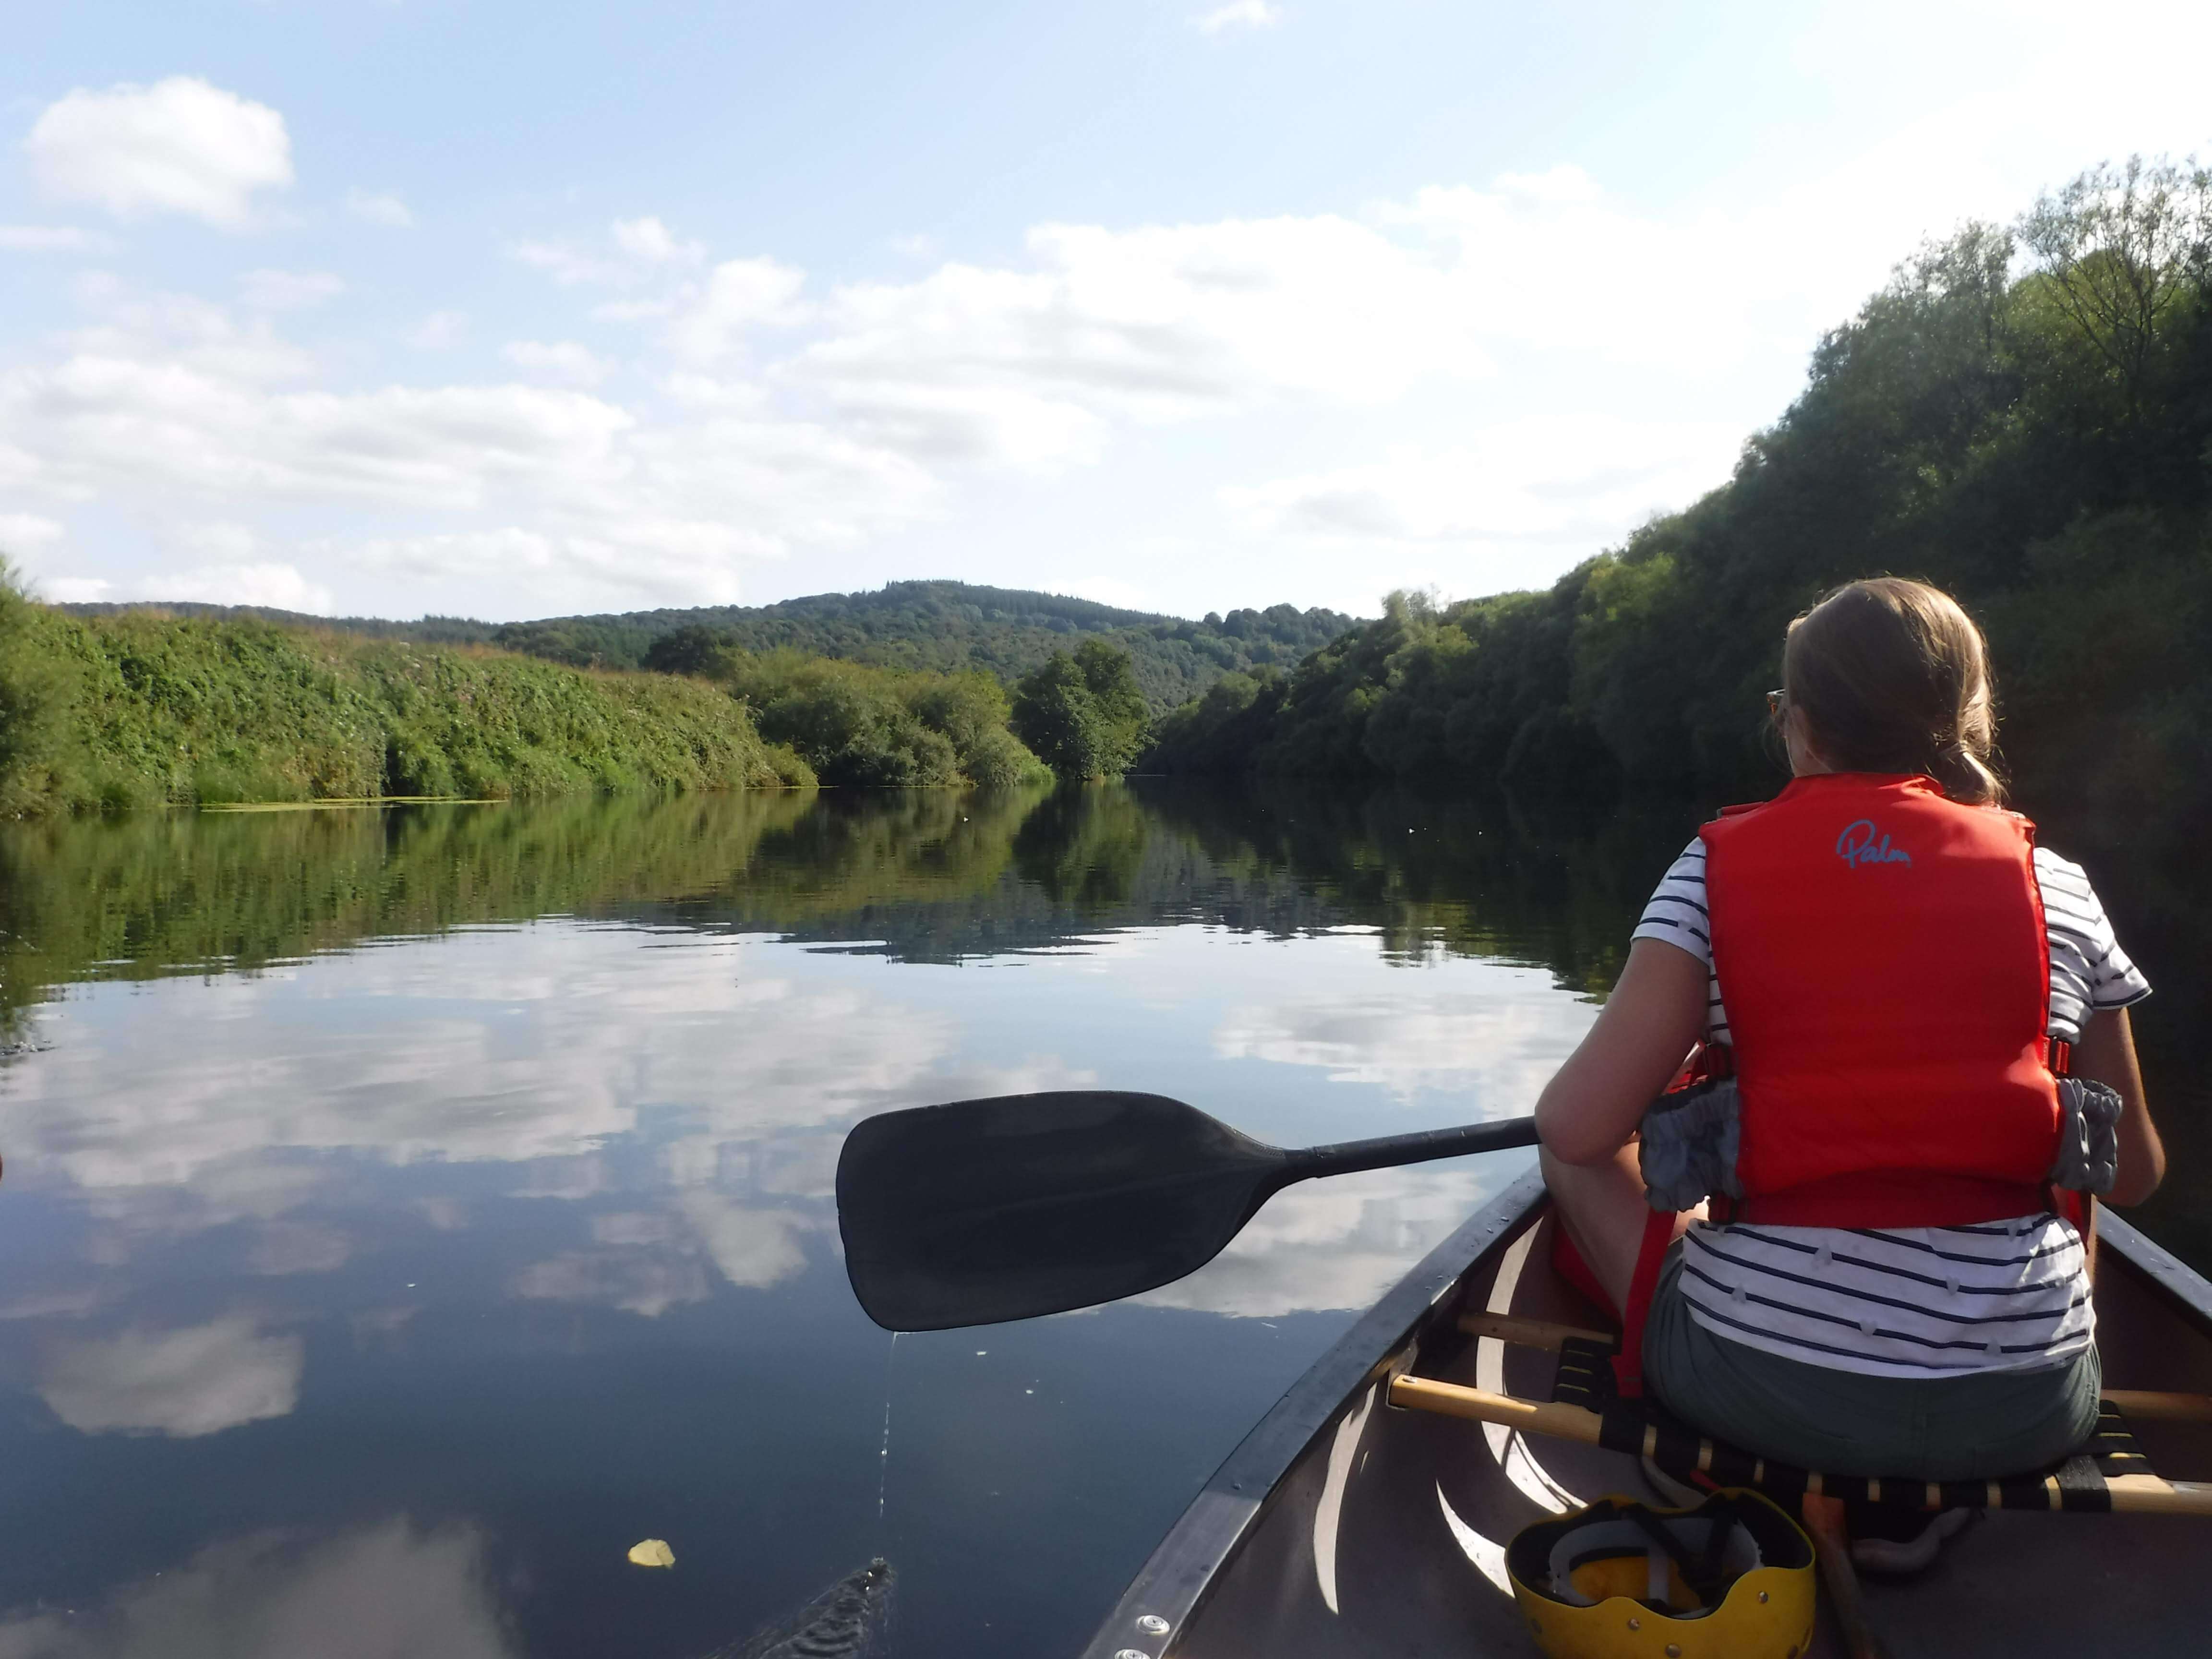 Stand-up paddle boarding/Canoeing/Kayaking Wye Valley